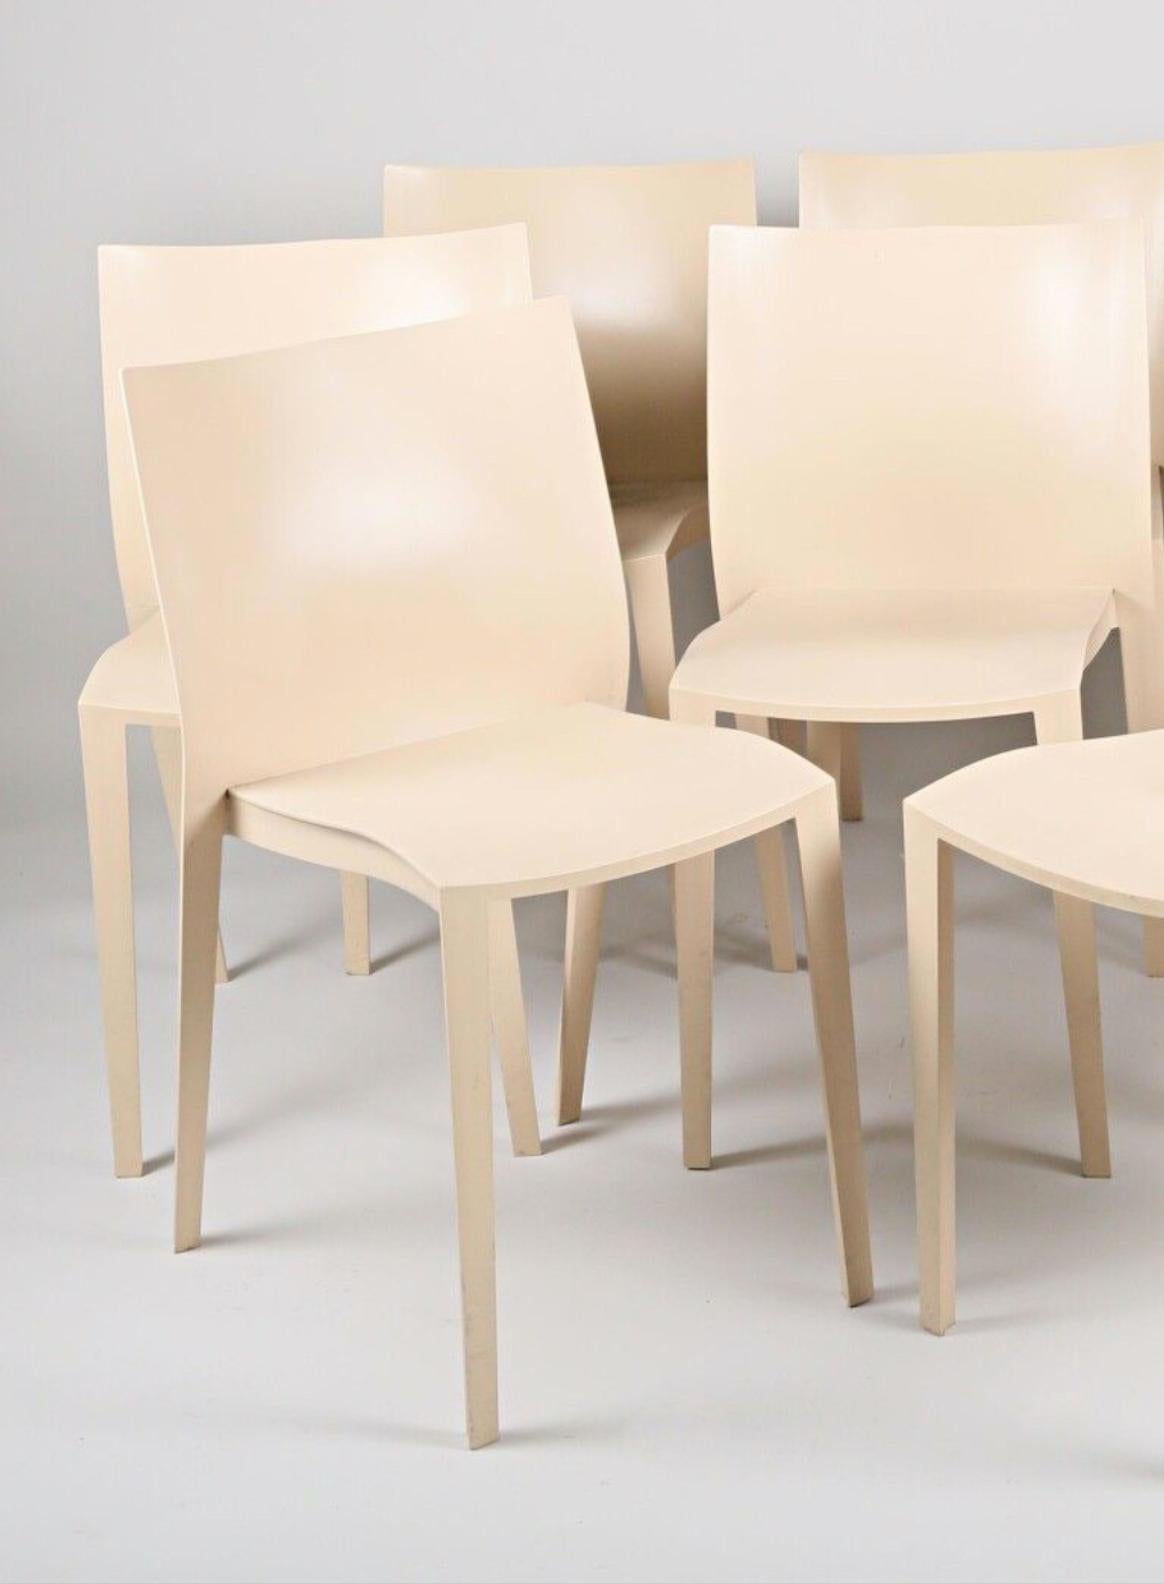 Well known plastic chairs by Philippe Starck in light cream color with a stamp under the seat.
Could be sold separately.
circa 1999.